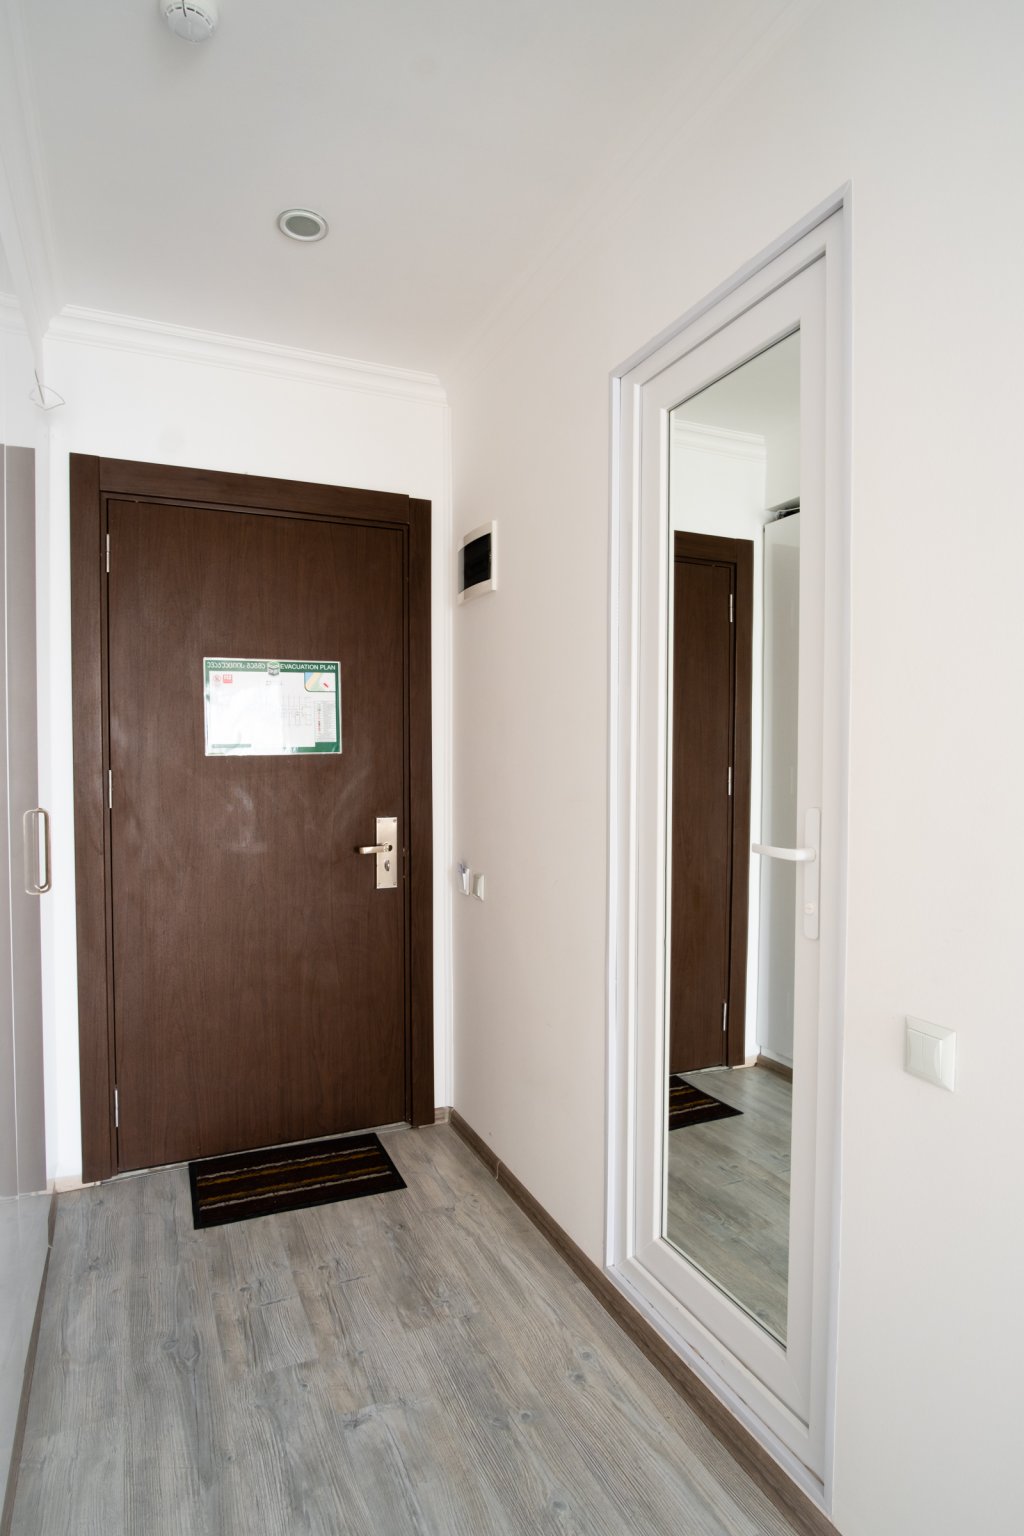 Studio with sea view in Orbi BeachTower #2324 id-1080 -  rent an apartment in Batumi